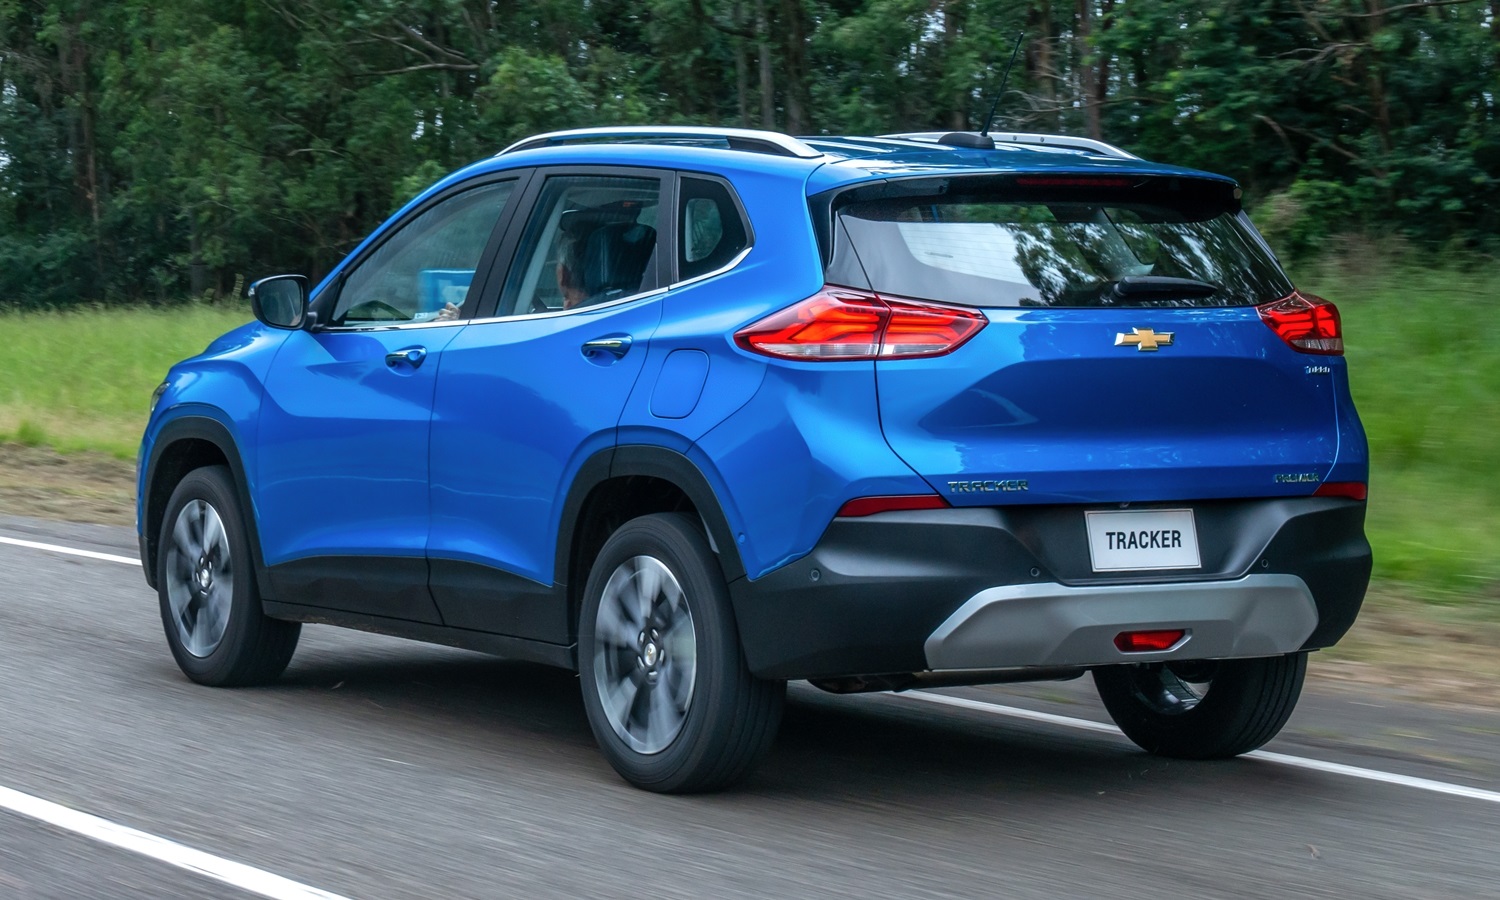 All-New Chevrolet Tracker Officially Launched – Butterfield Motors Ltd.